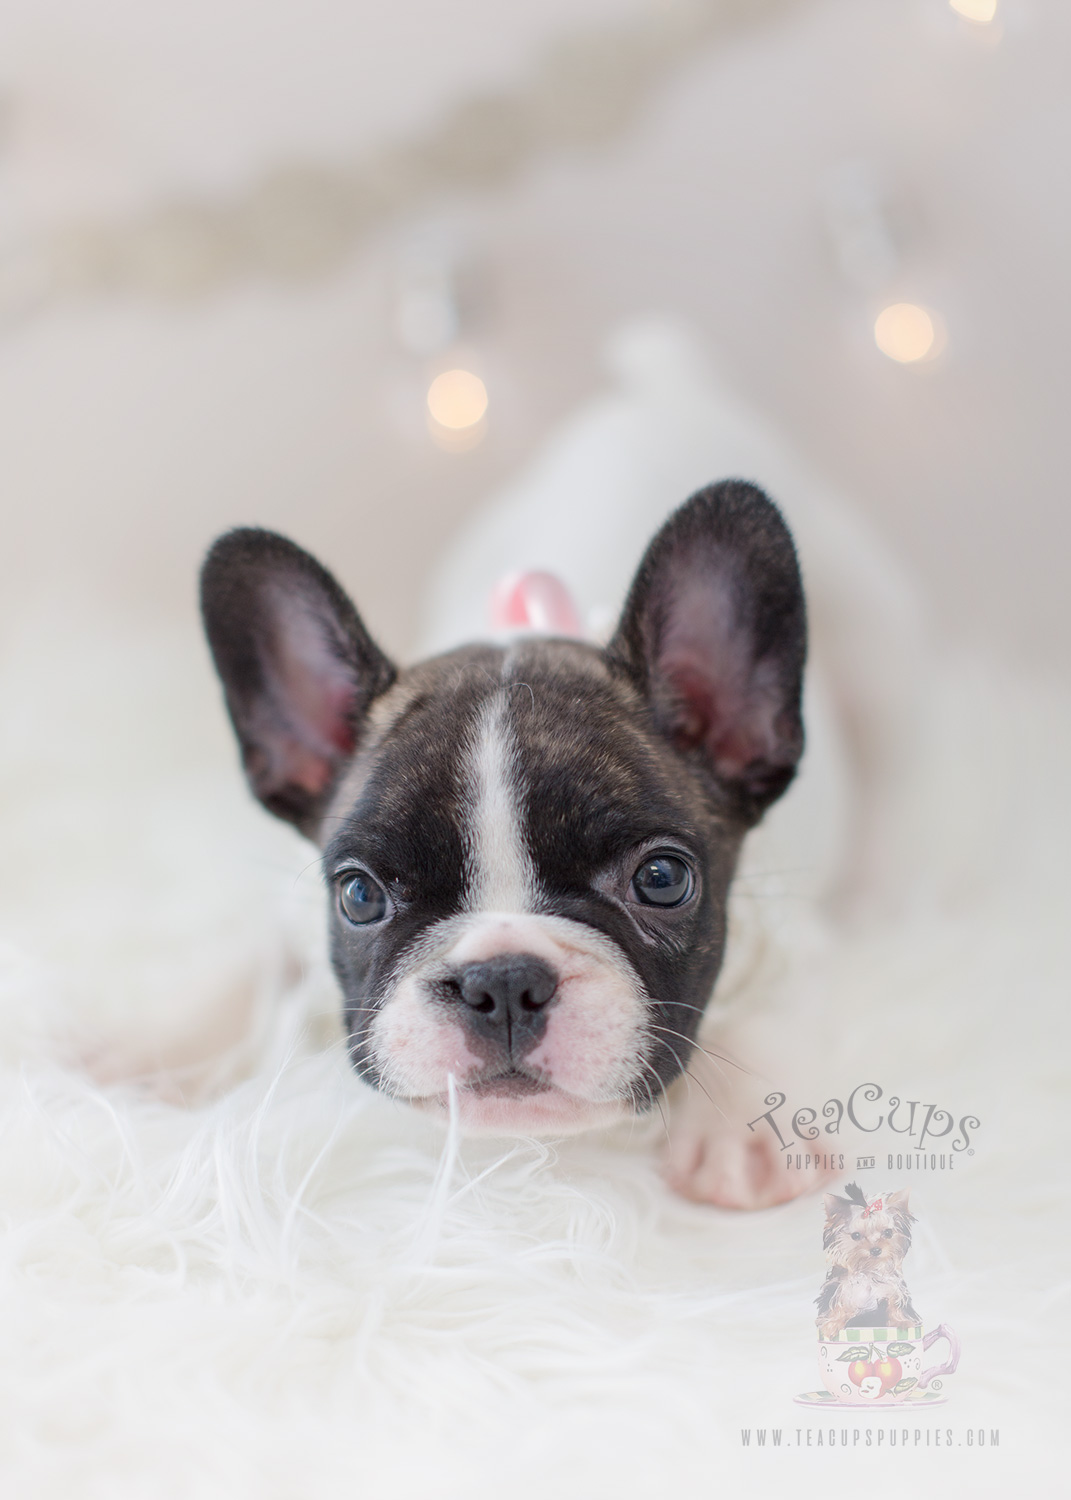 For Sale #302 Teacup Puppies French Bulldog Puppy